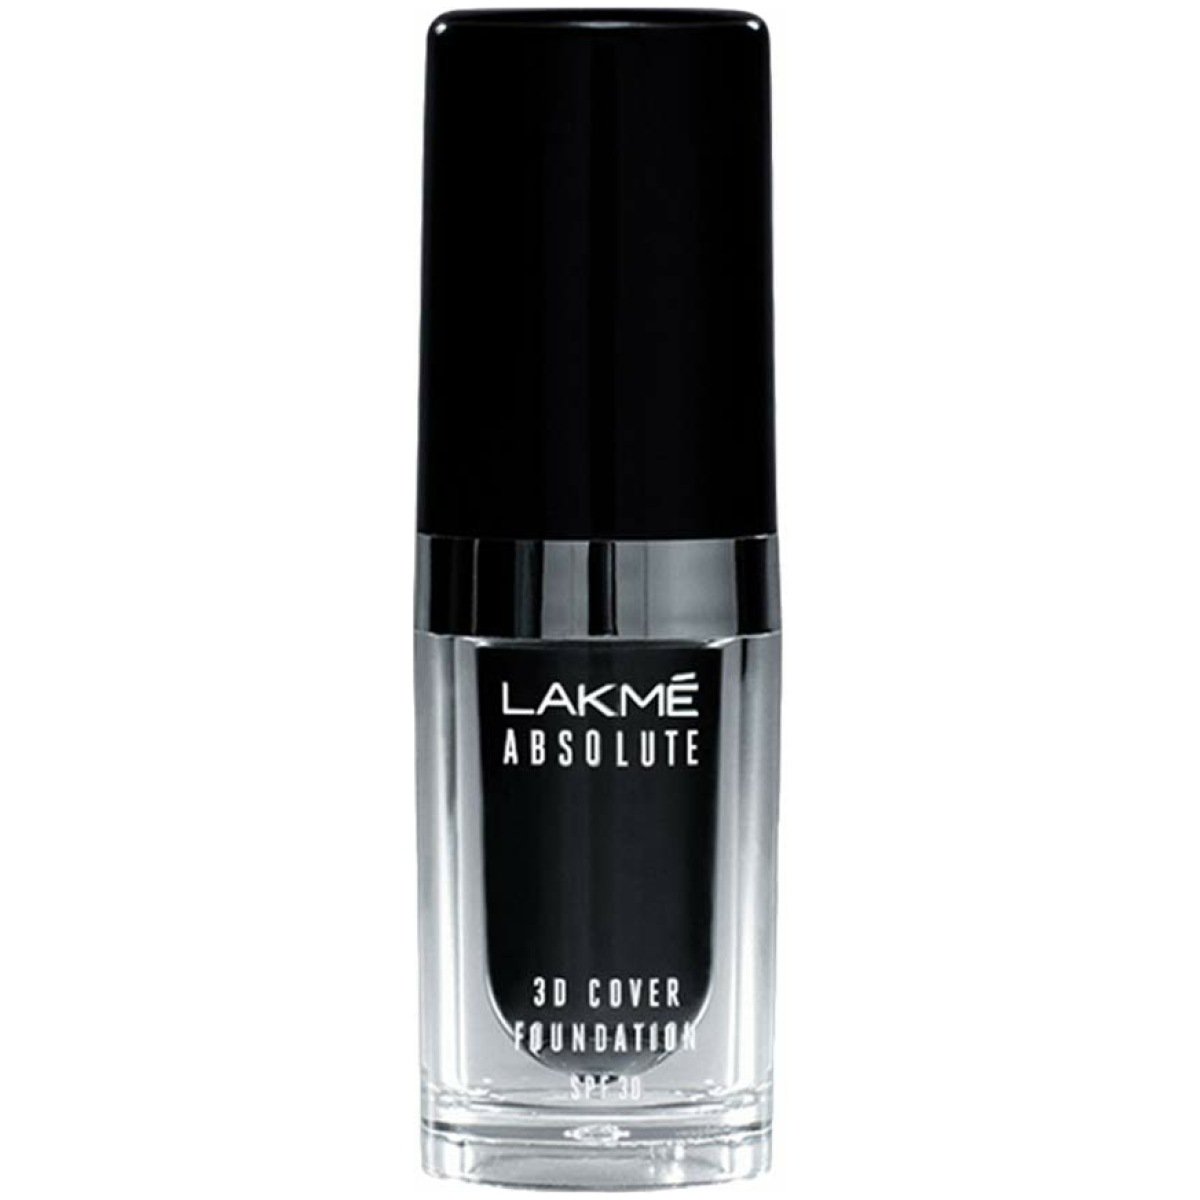 Lakme Absolute 3D Cover Foundation - Cool Ivory